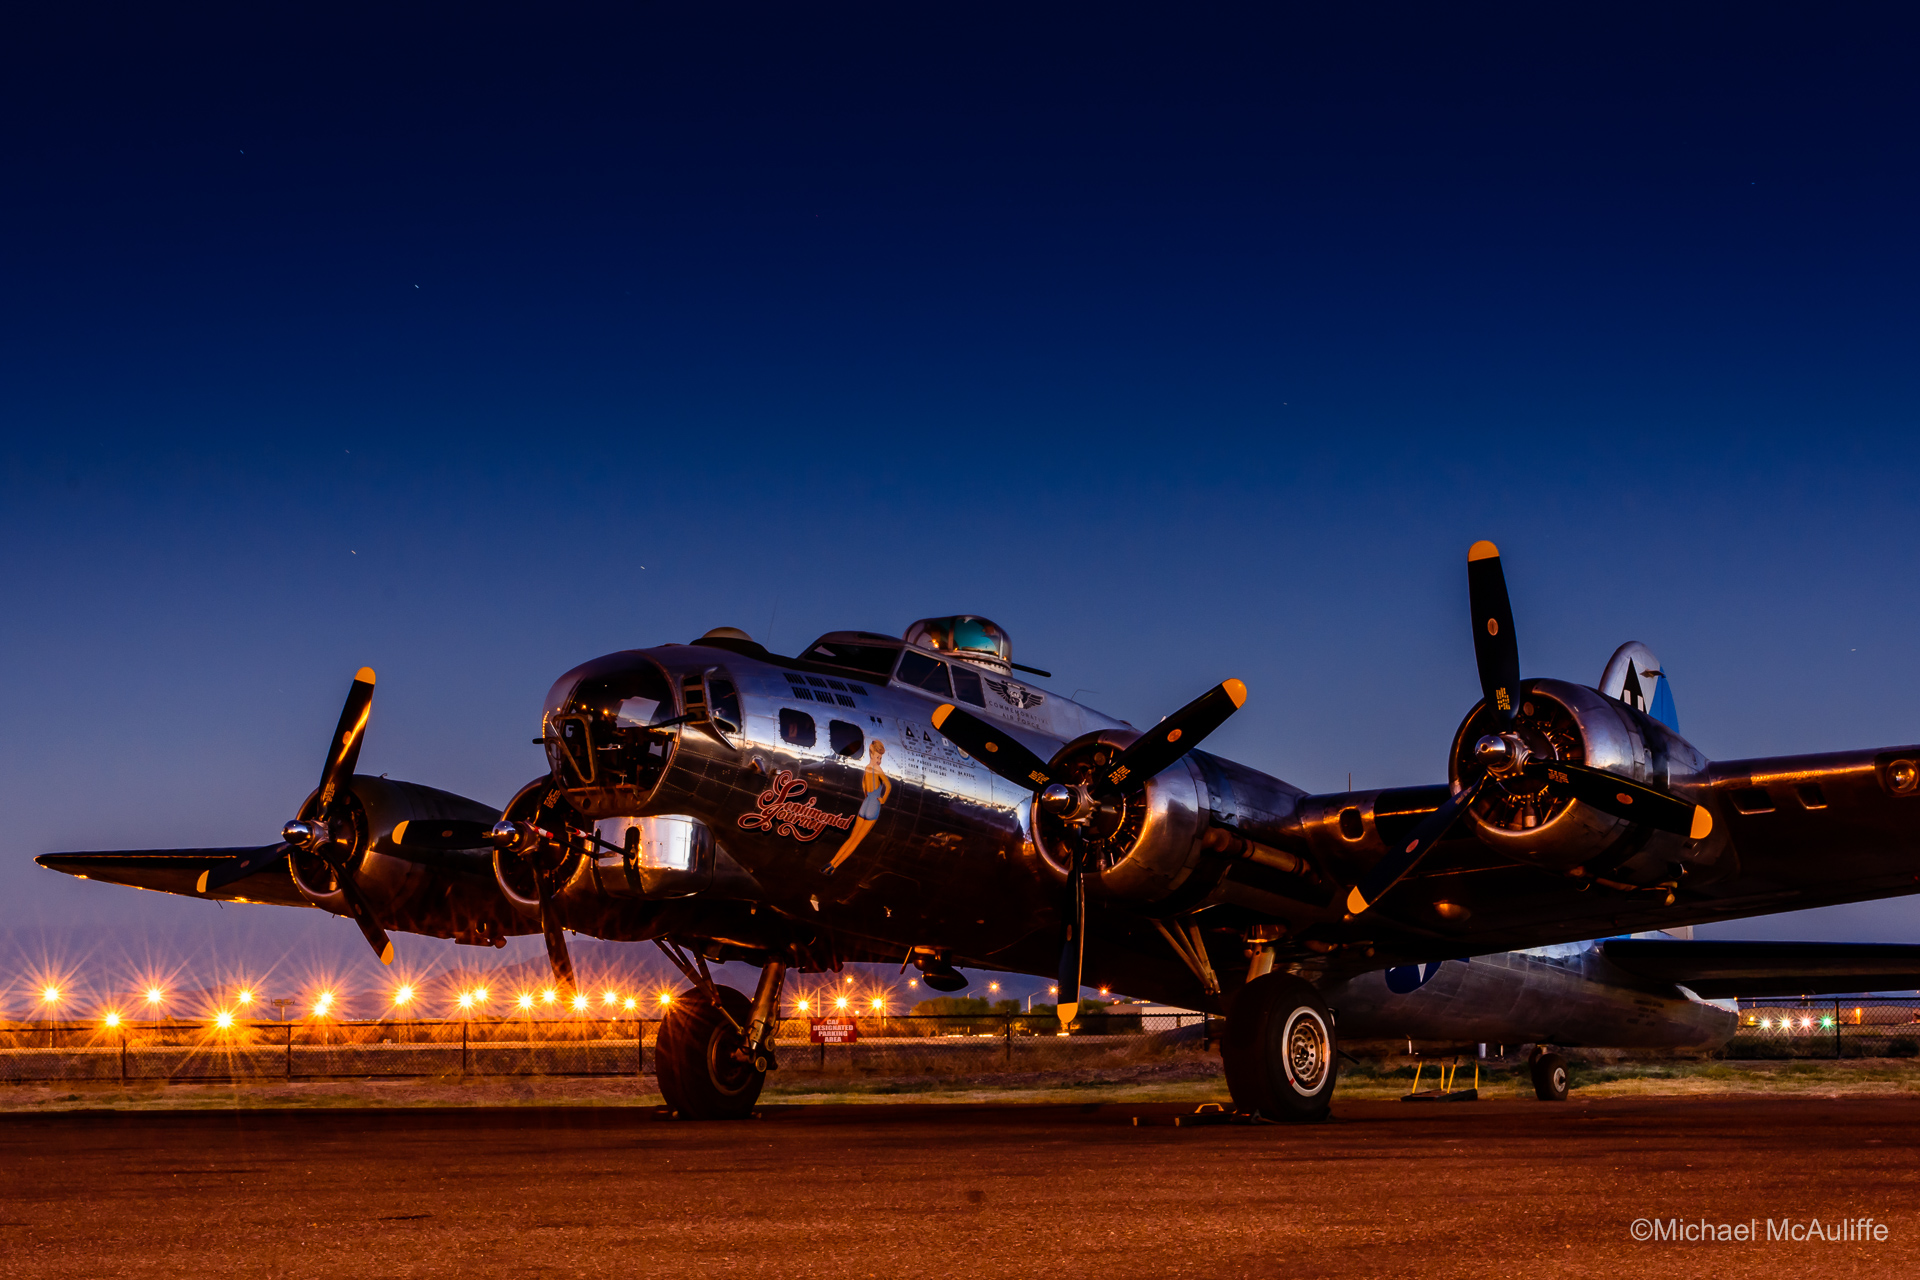 The B-17 Flying Fortress Sentimental Journey at the Arizona Commemorative Air Force Museum.